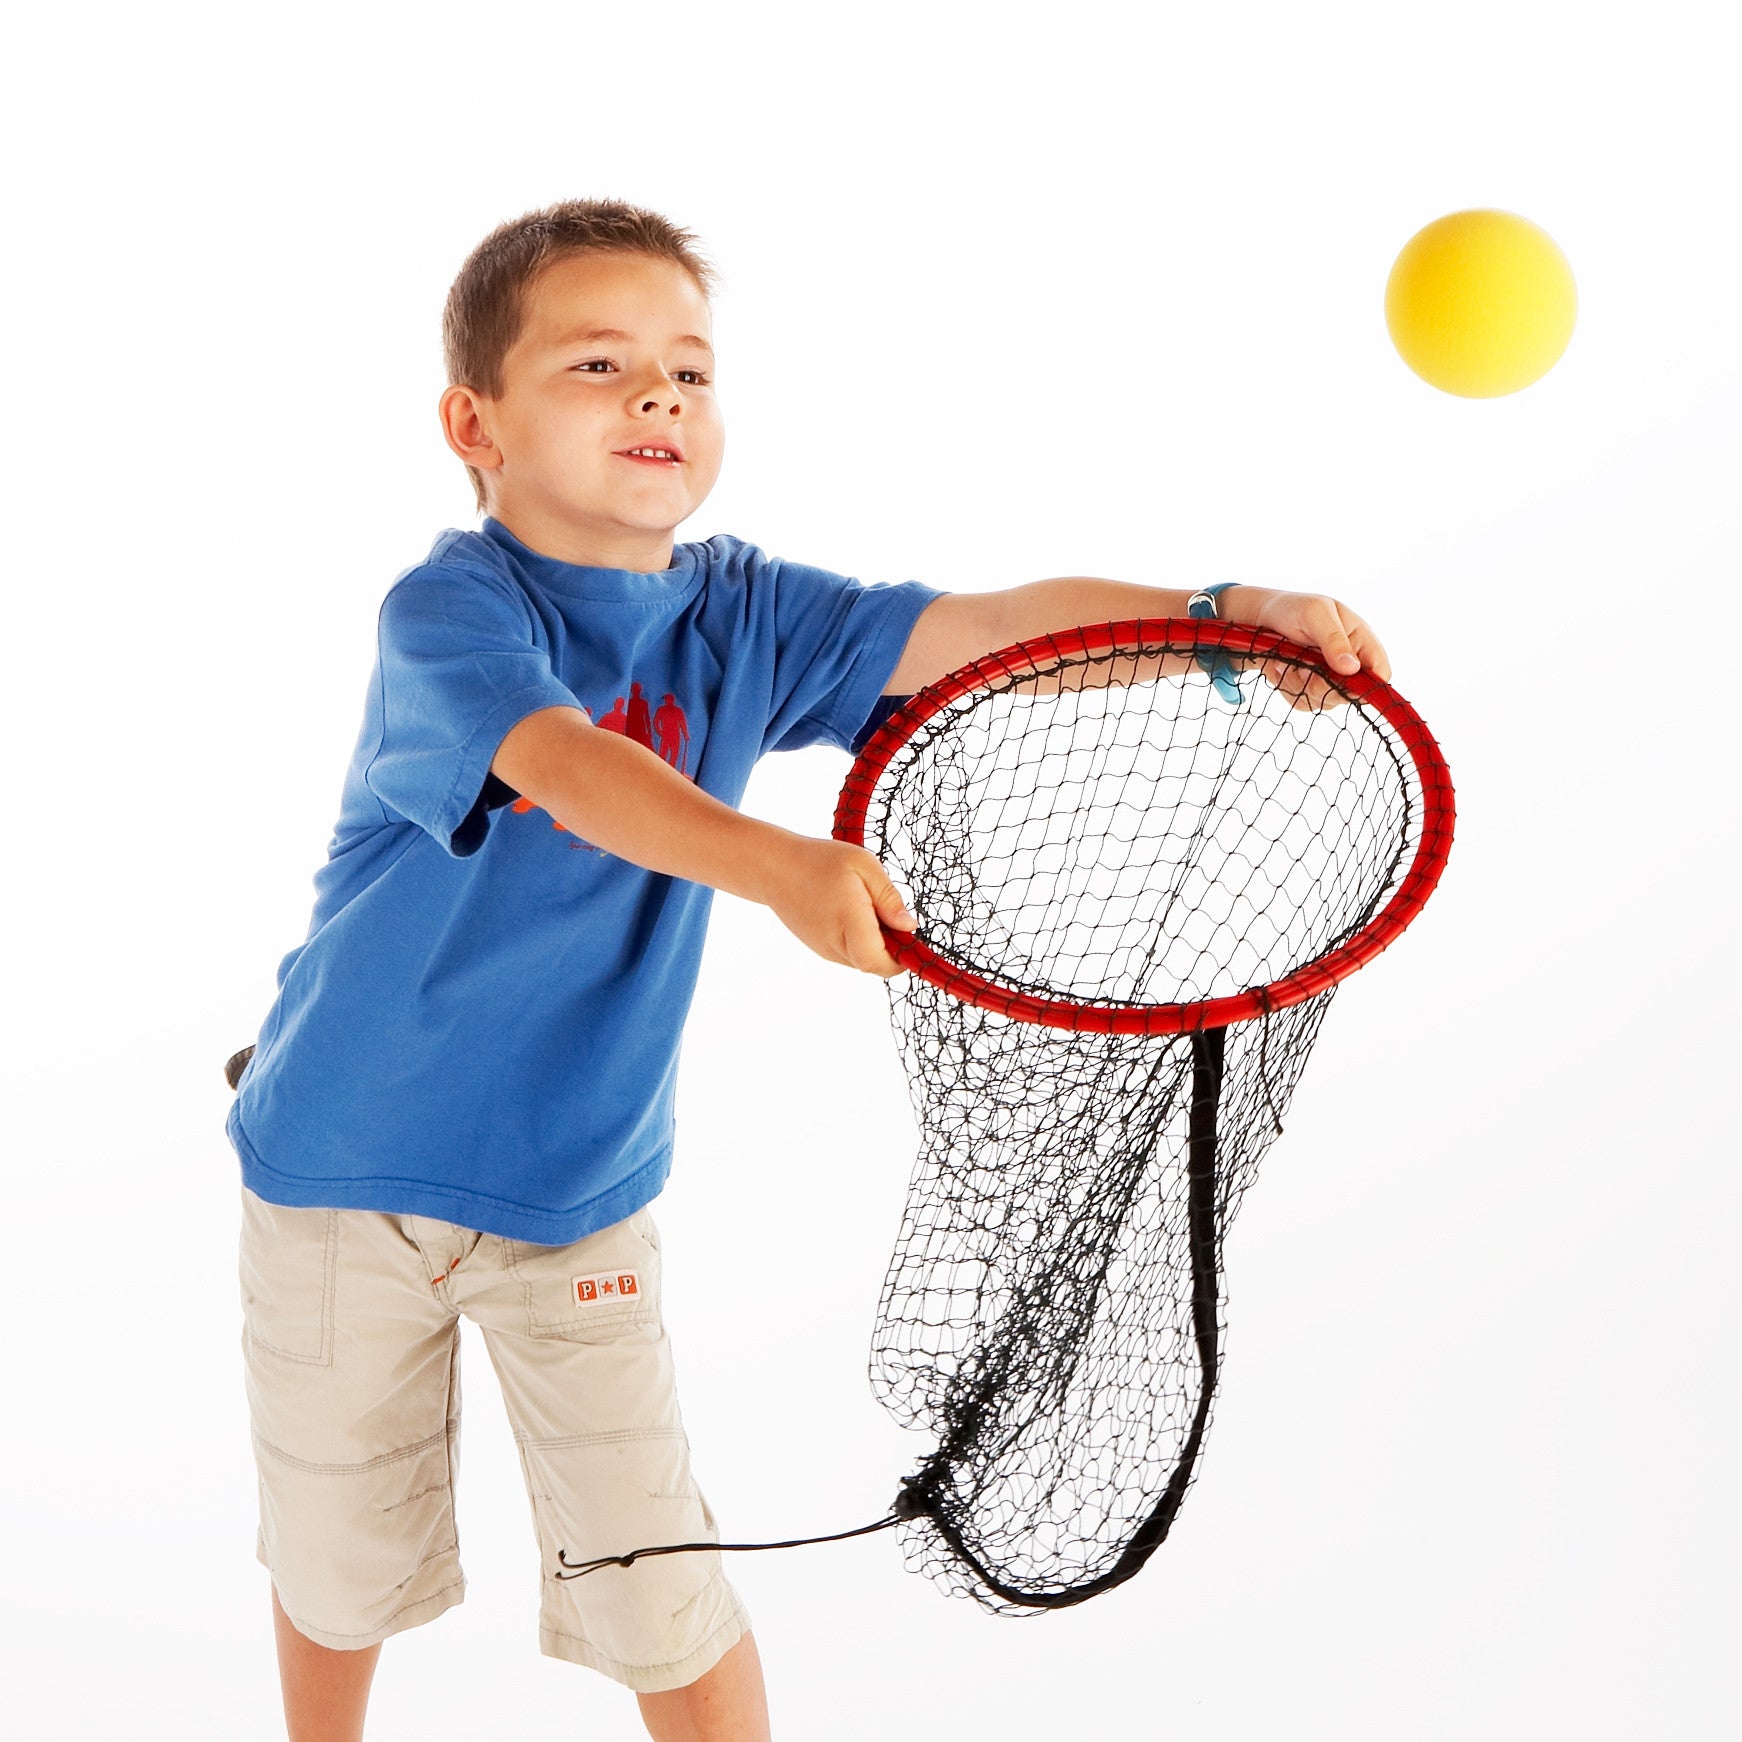 early Years Coaching Aid for hand-eye coordination & ball skills development. Easy Catch Net for pair catching & aiming games.